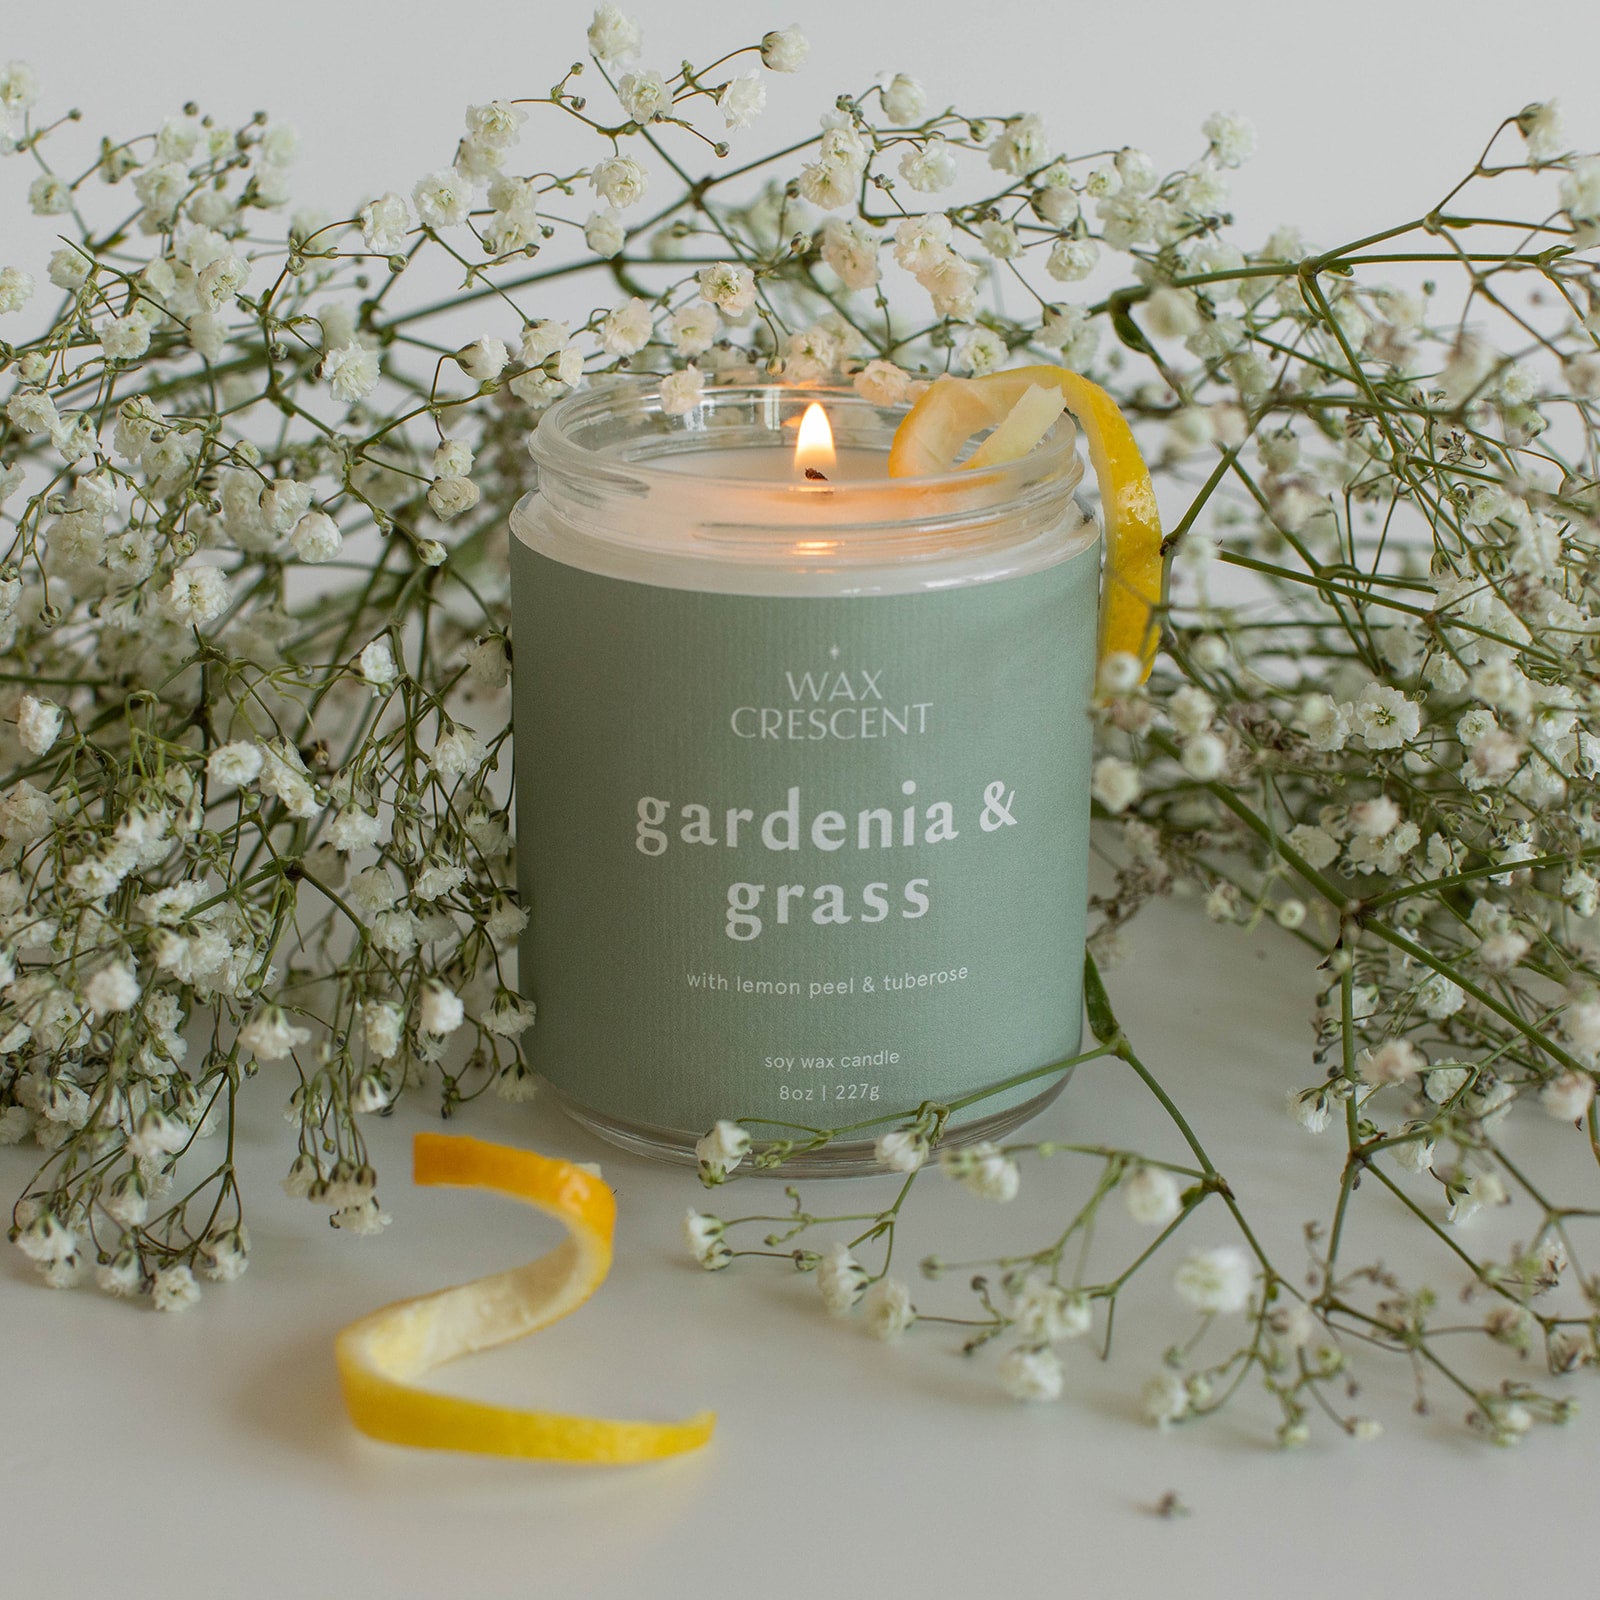 gardenia & grass soy wax candle made in Longmont Colorado outside of Boulder with non-toxic and eco-friendly ingredients. Always sustainable and vegan